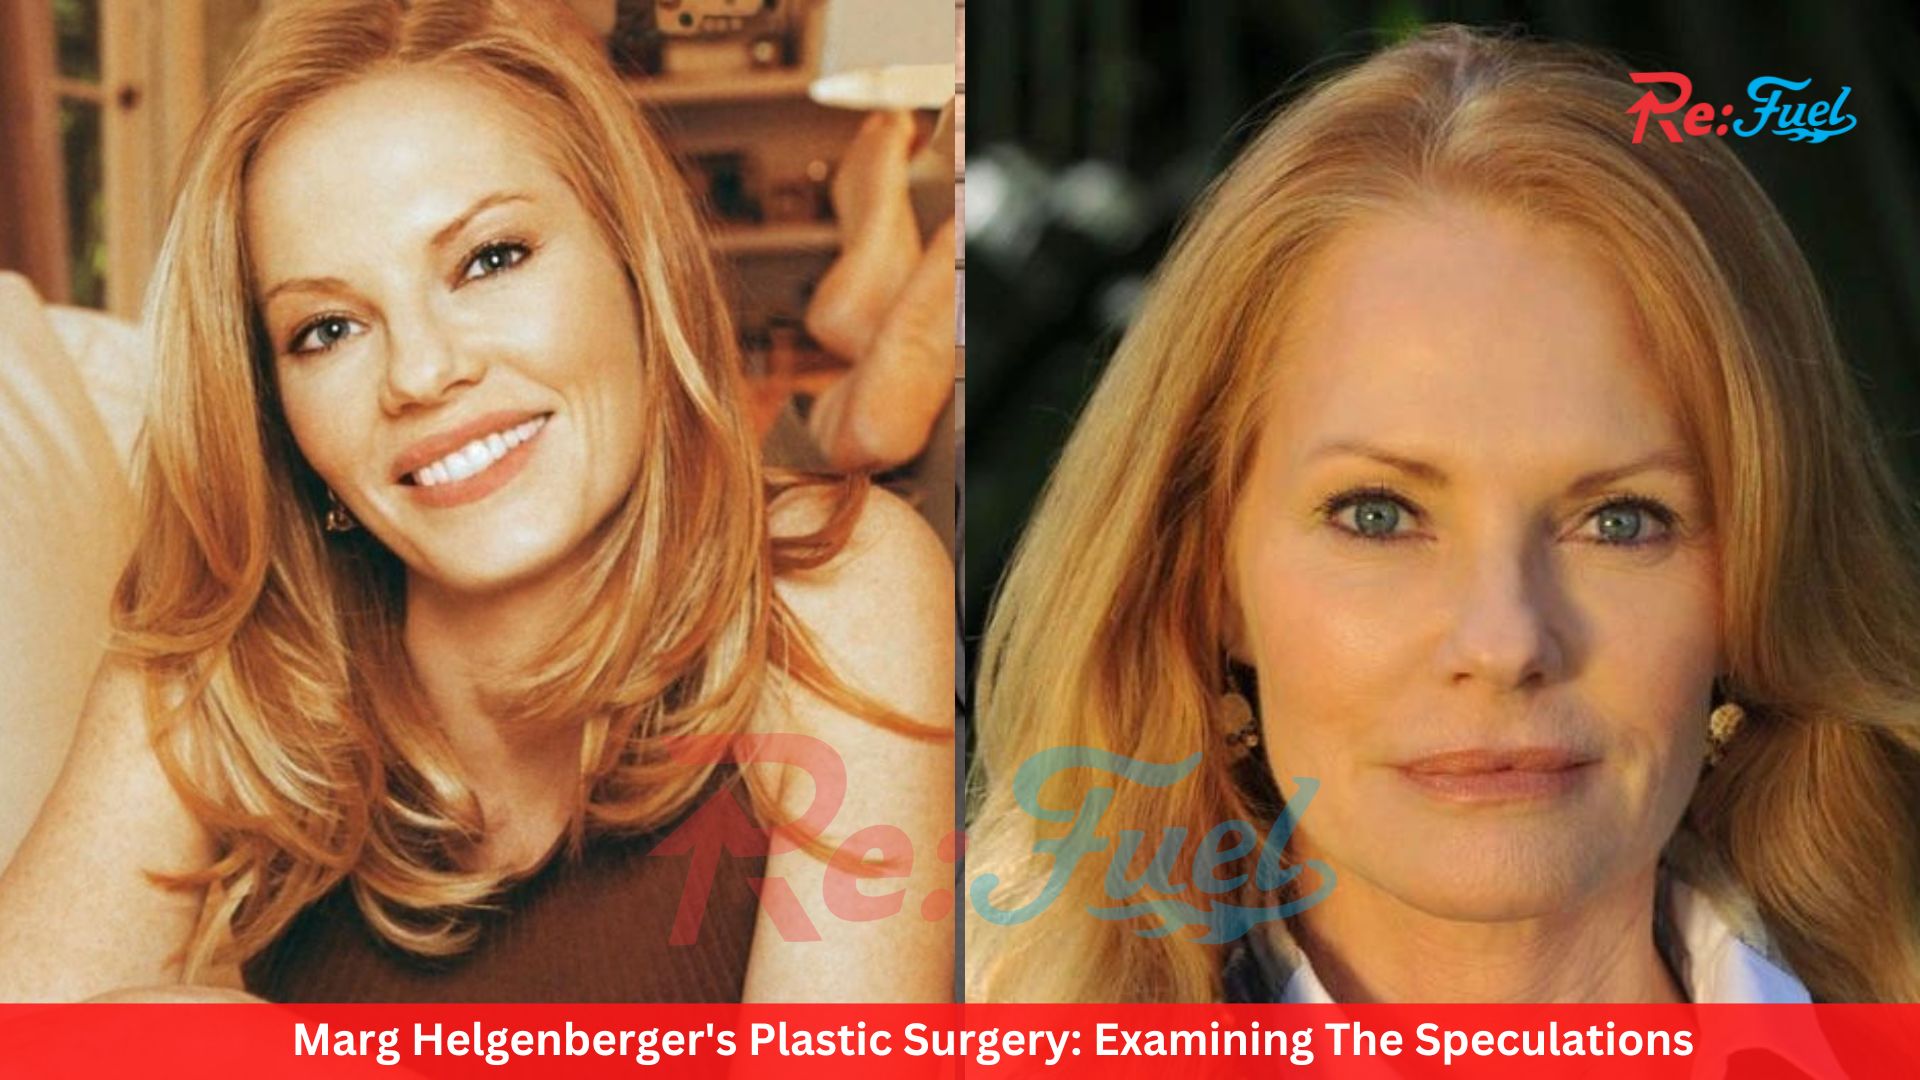 Marg Helgenberger's Plastic Surgery: Examining The Speculations